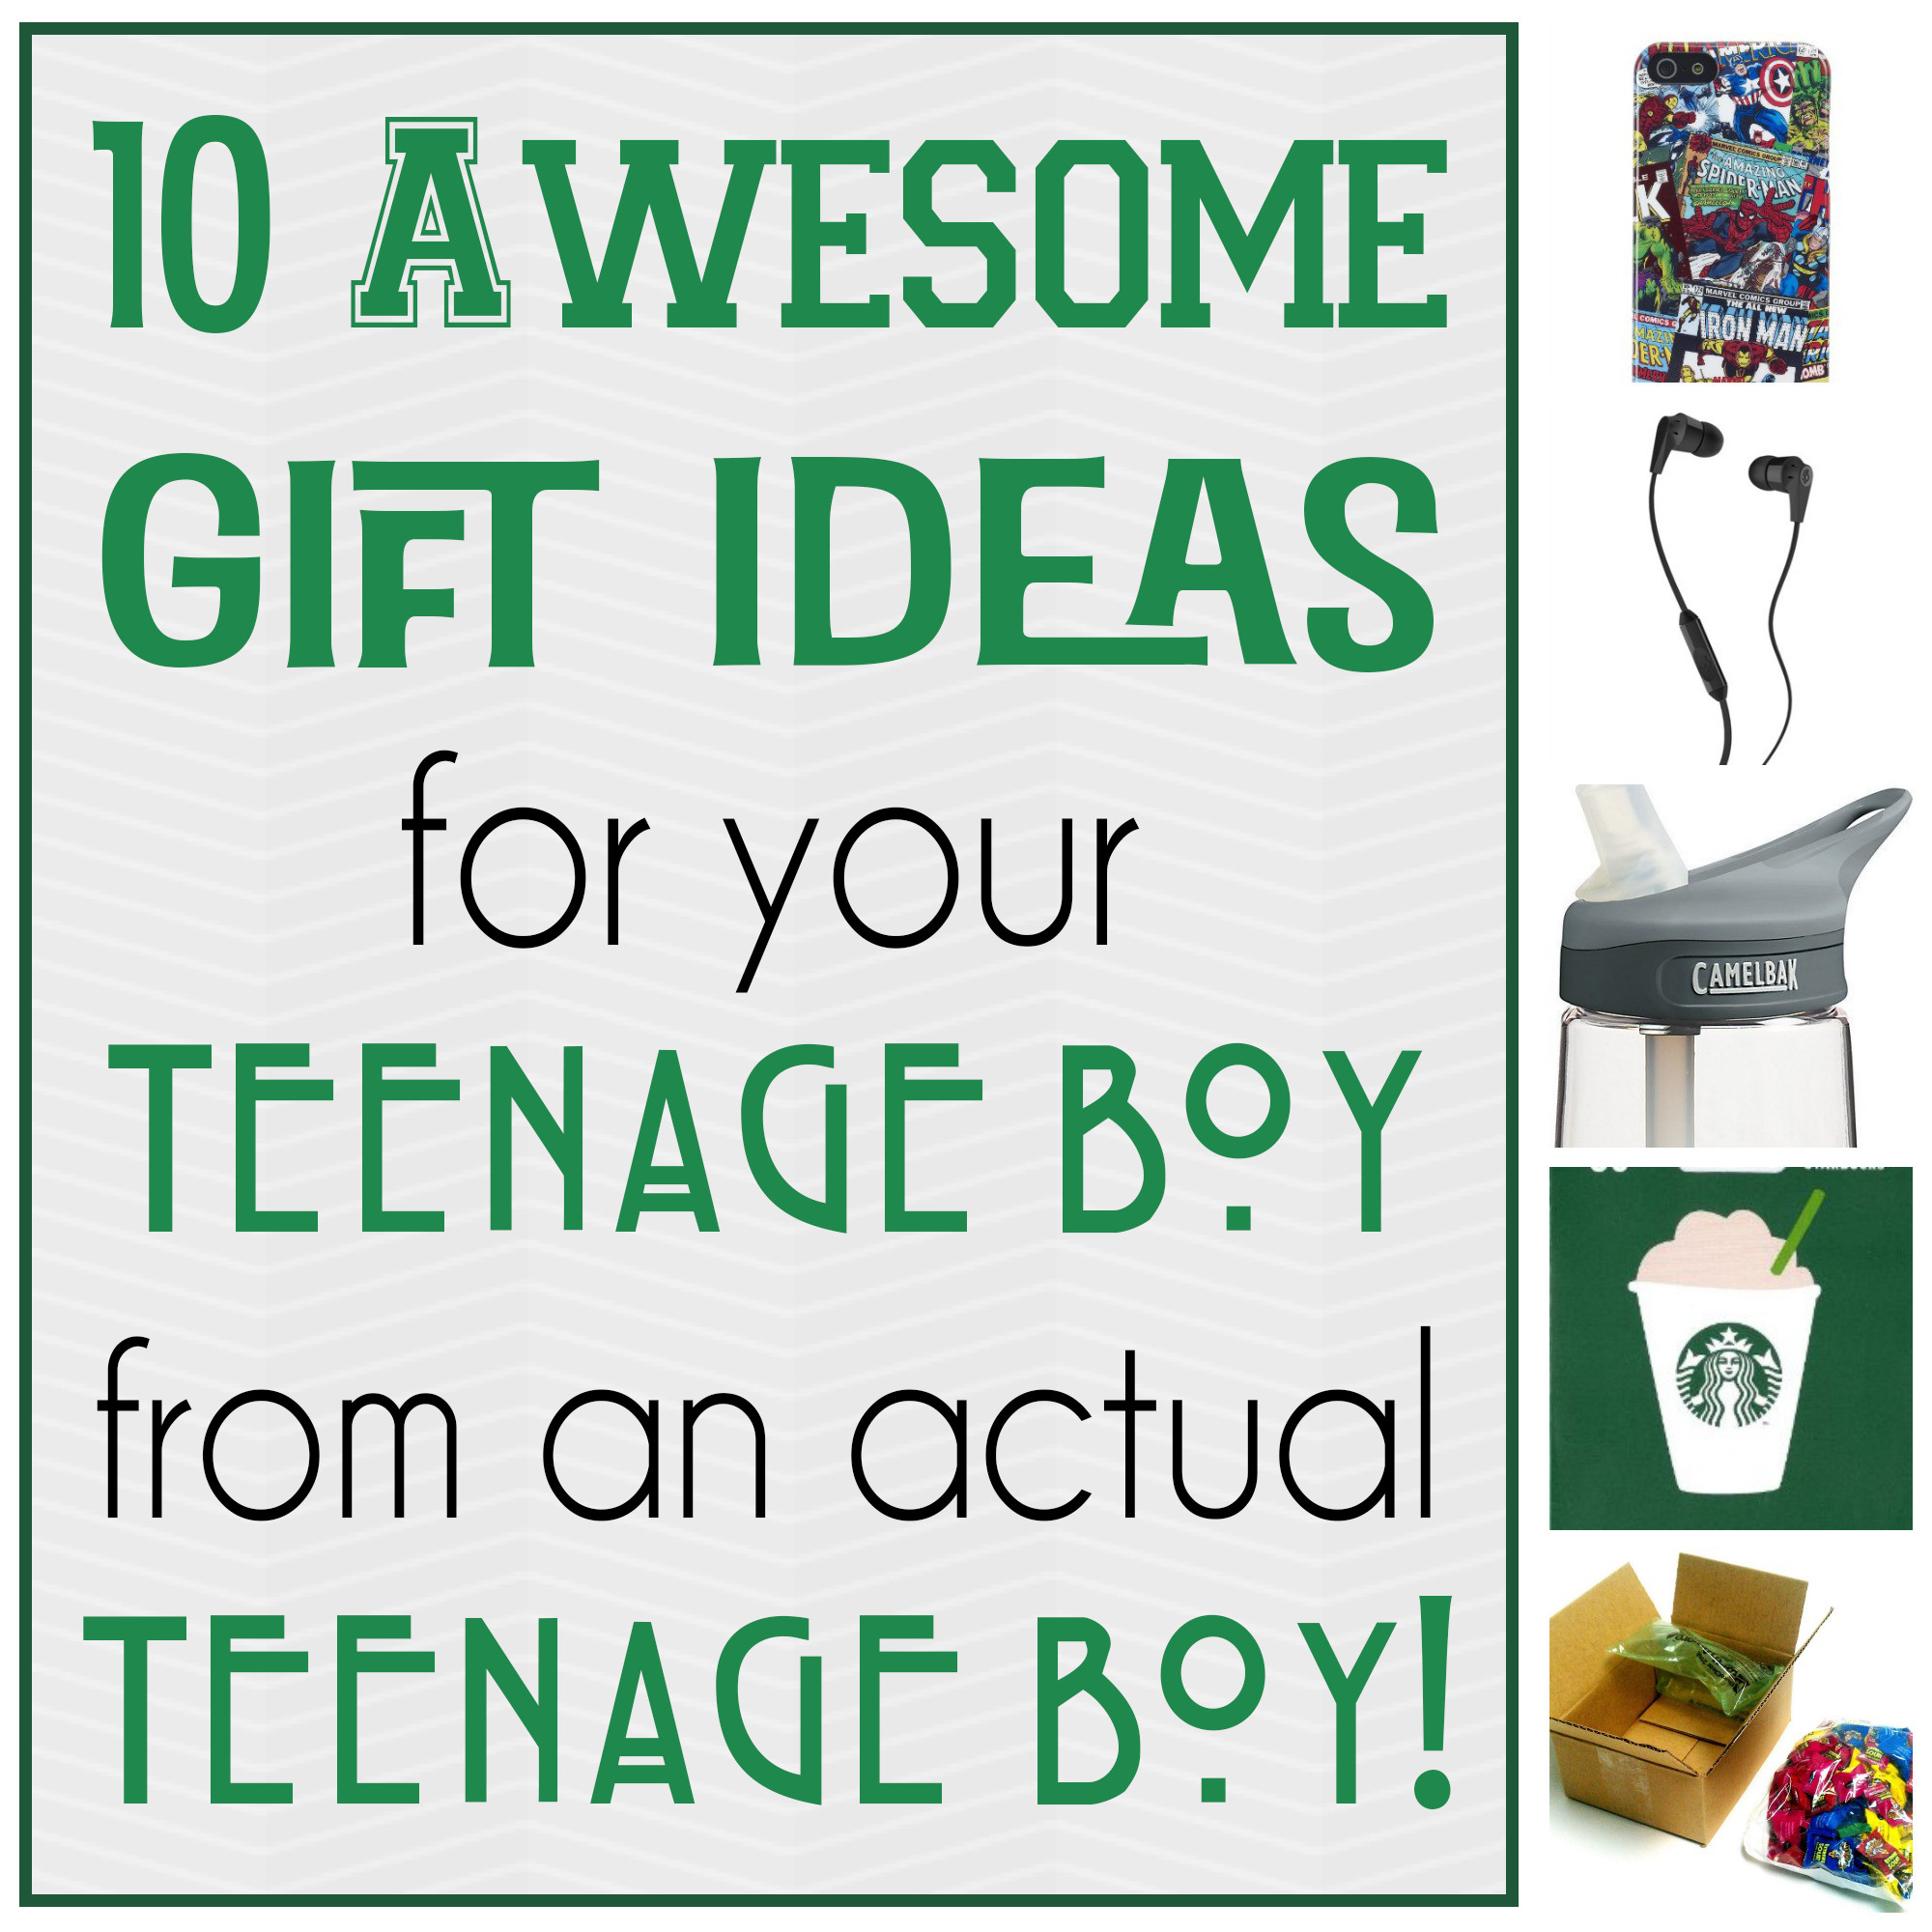 Gift Ideas For Teenage Boys
 10 Awesome Gift Ideas for Teenage Boys